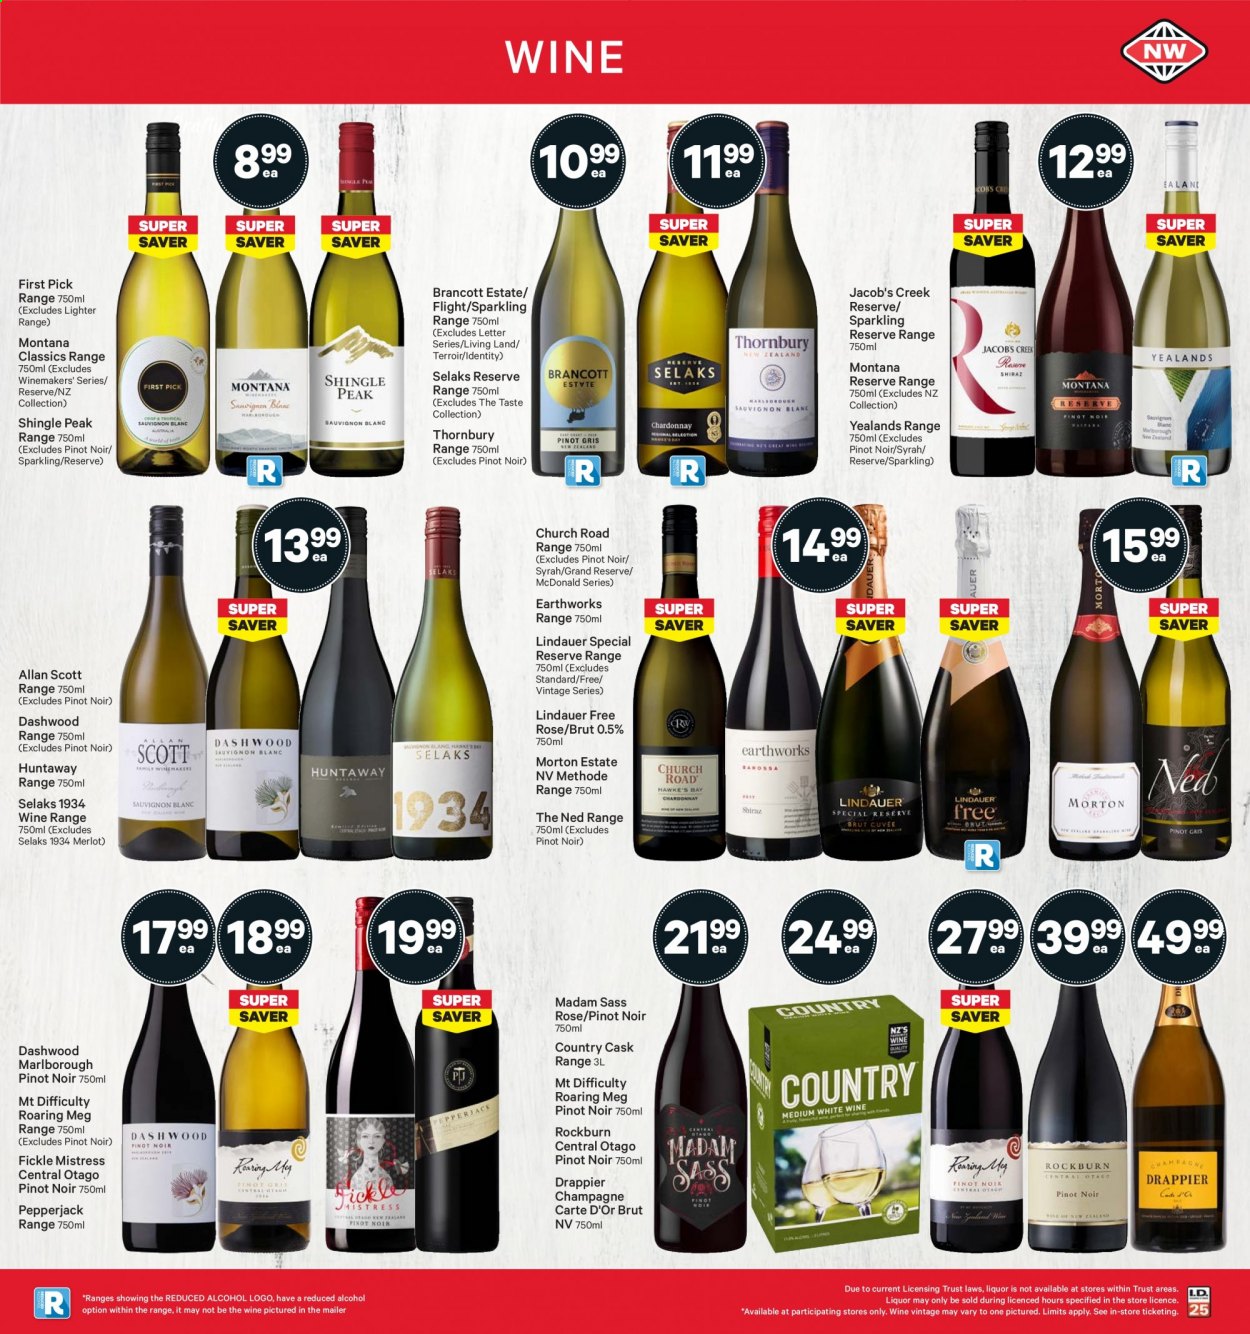 thumbnail - New World mailer - 02.08.2021 - 08.08.2021 - Sales products - Pepper Jack cheese, red wine, sparkling wine, champagne, wine, Merlot, Pinot Noir, Lindauer, alcohol, Syrah, Jacob's Creek, rosé wine, Scott, Brut. Page 31.